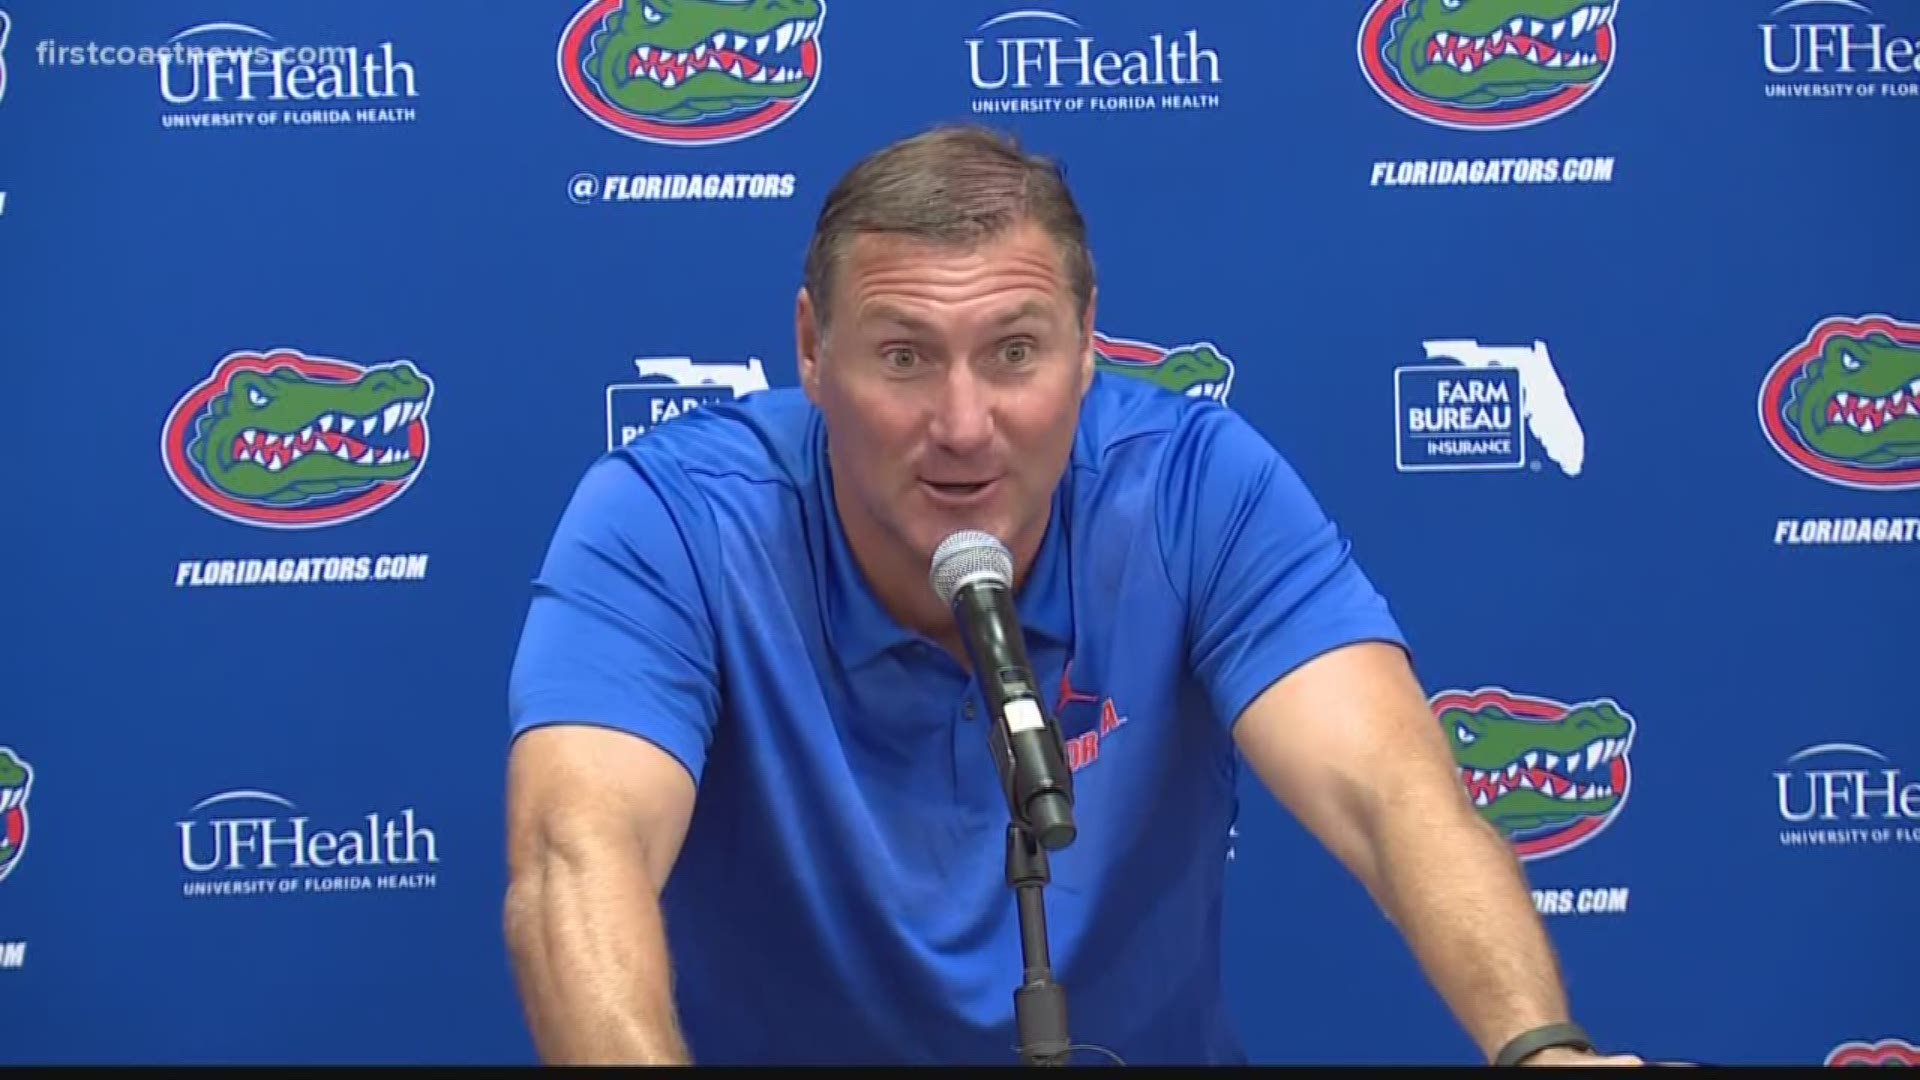 This is the first time Head Coach Dan Mullen has faced the media since the story broke about alleged gambling activity involving Gators players.